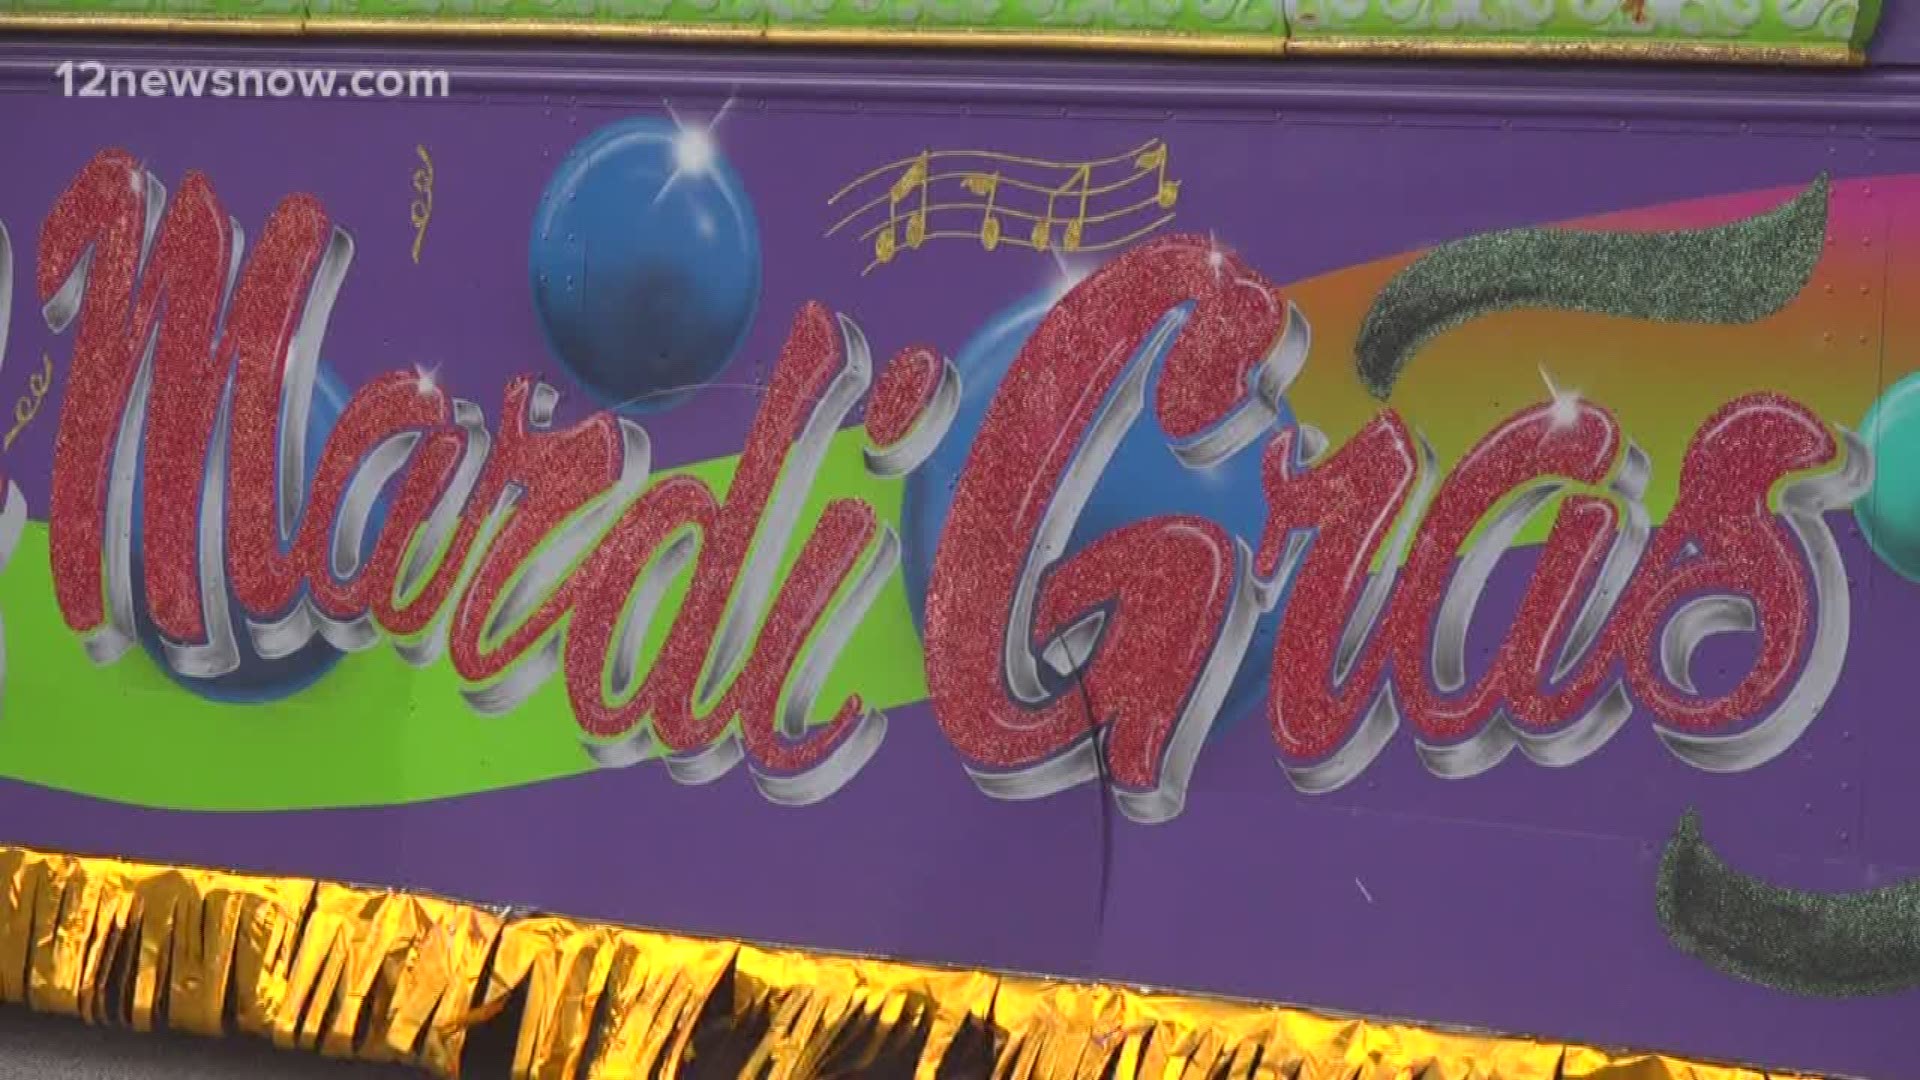 More than 30 floats are at the Port of Beaumont awaiting the celebration